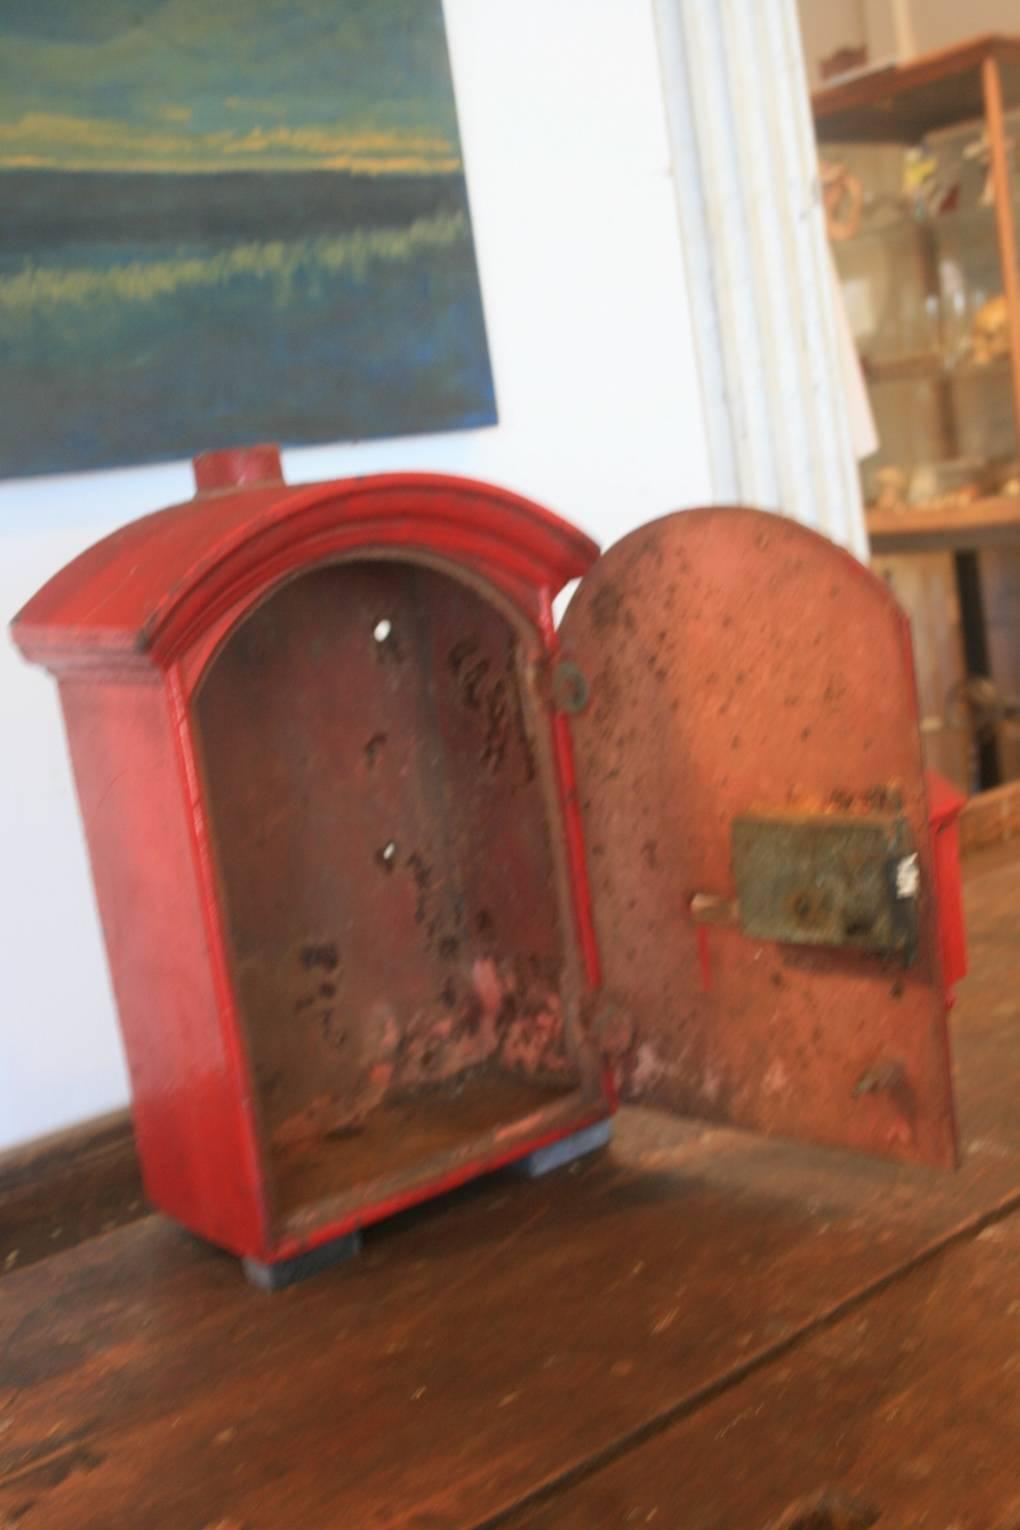 Early 20th Century New York City Red Fire Alarm Box